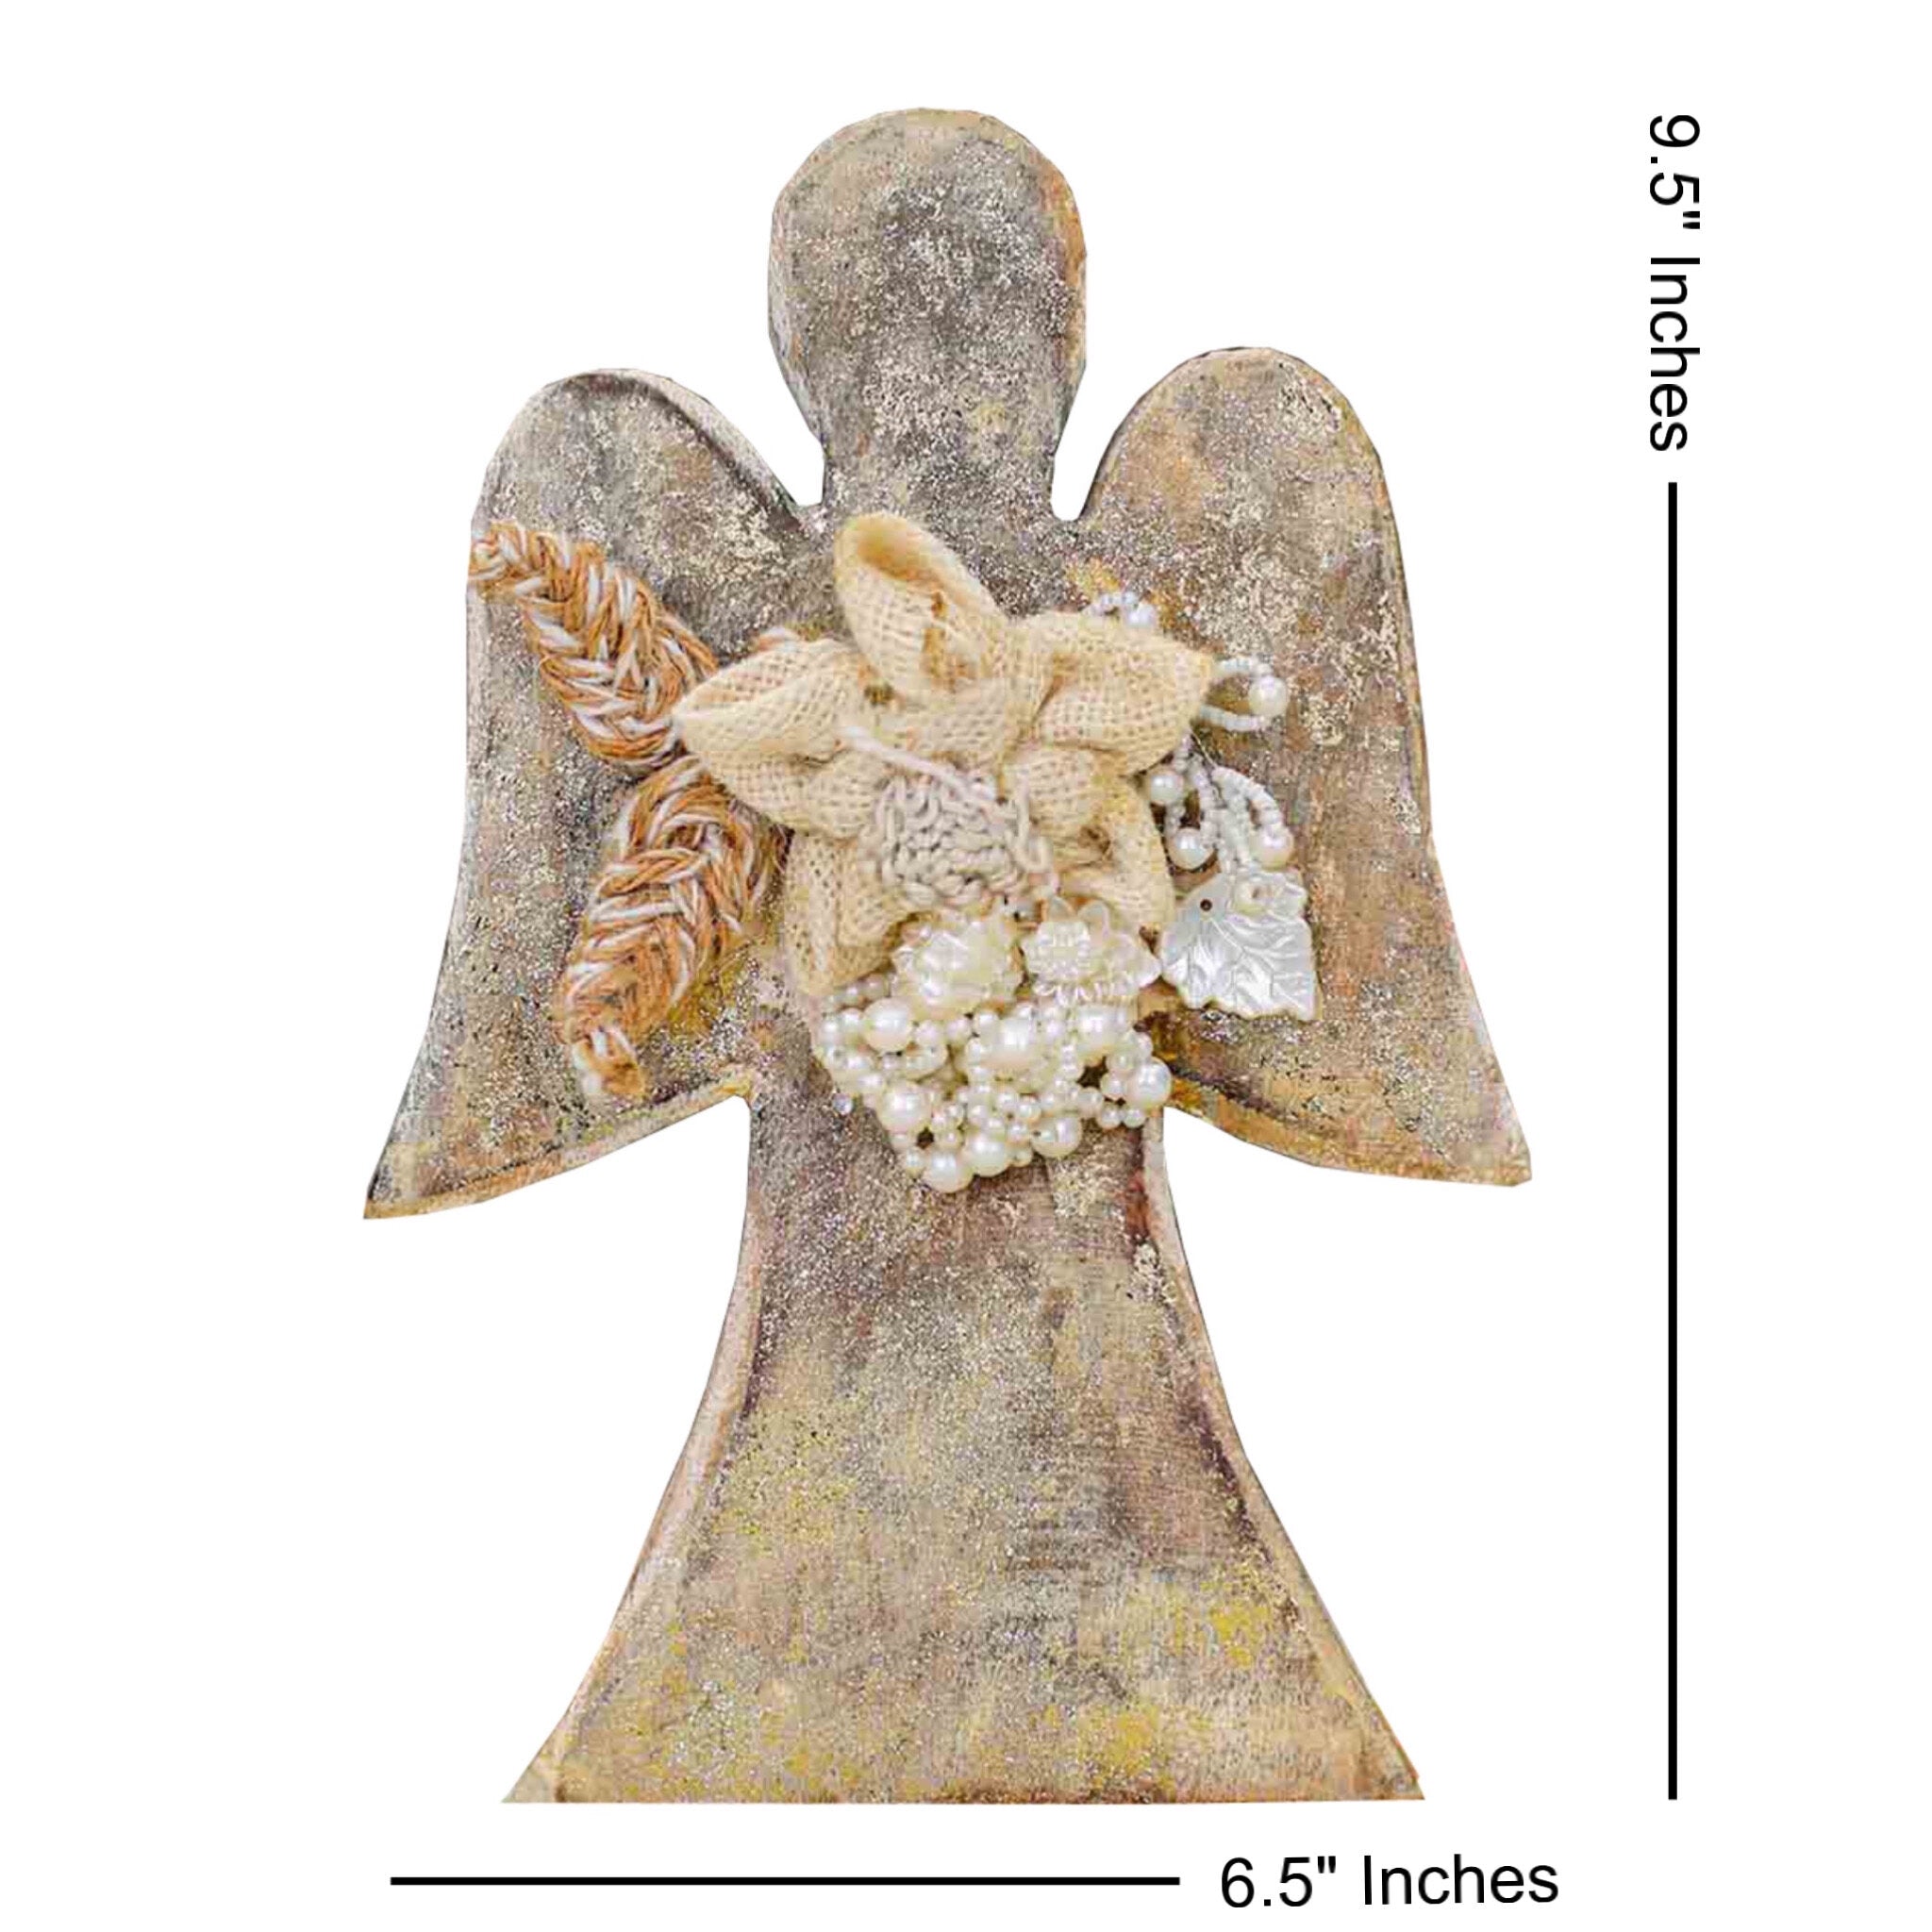 Earth Angel Wood Sculpture in White